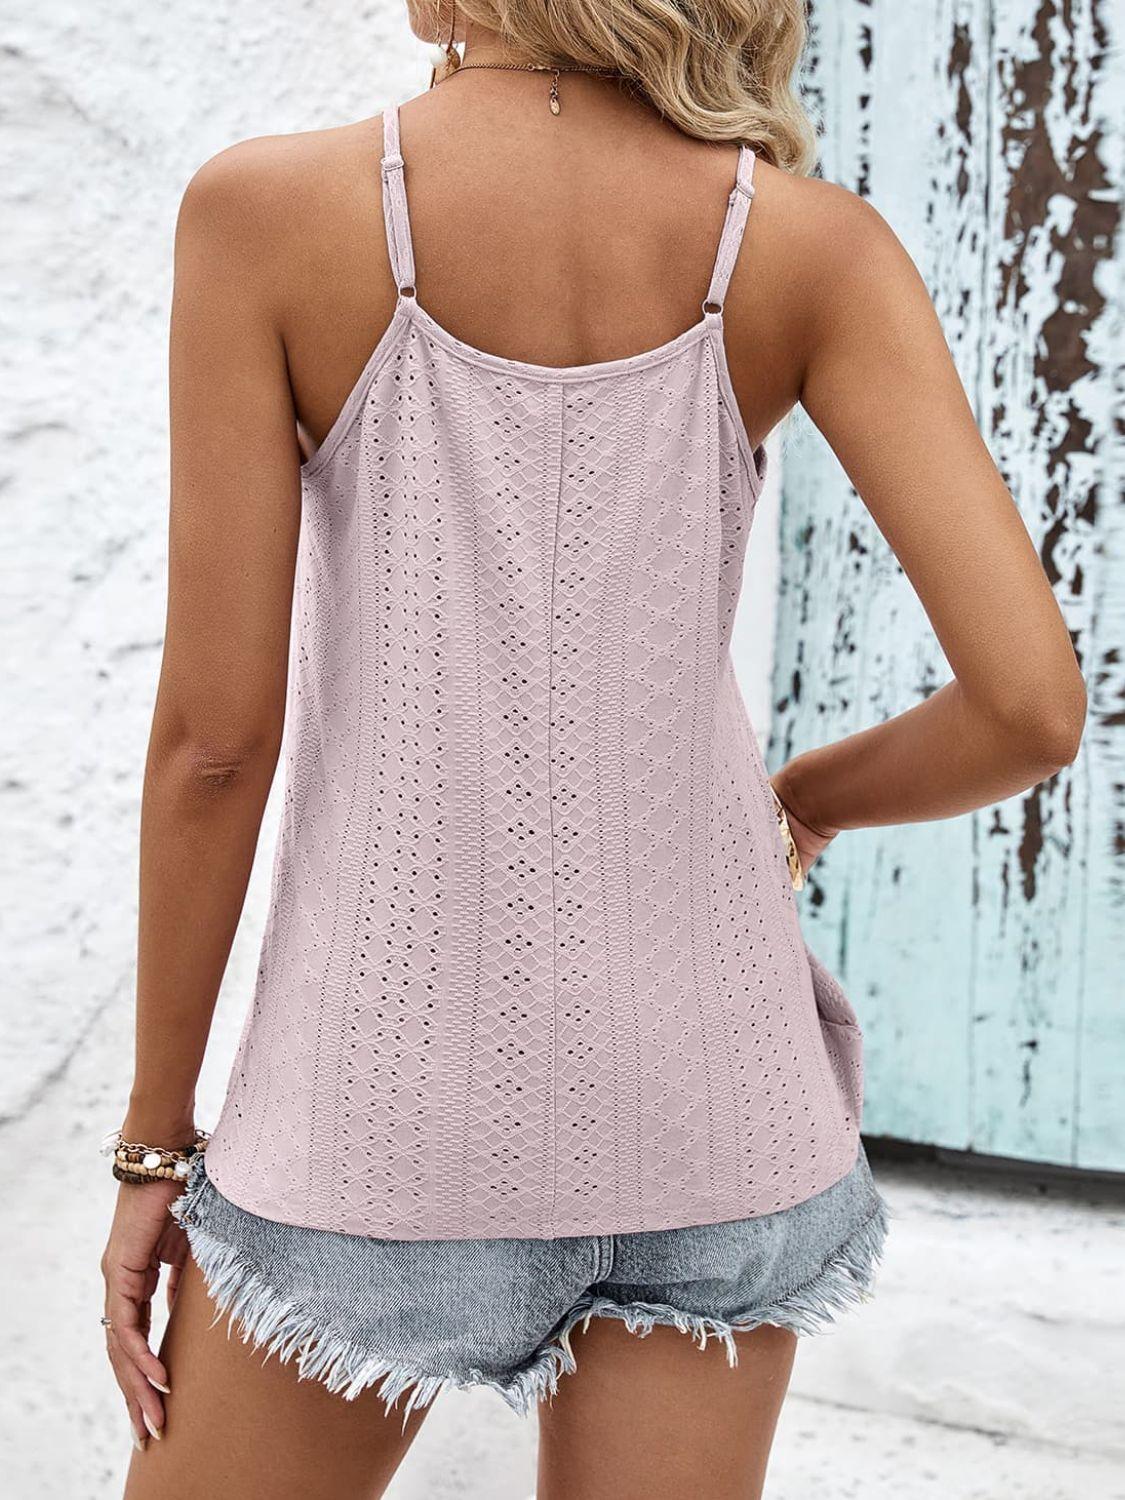 Contrast Eyelet Cami Top - Lab Fashion, Home & Health